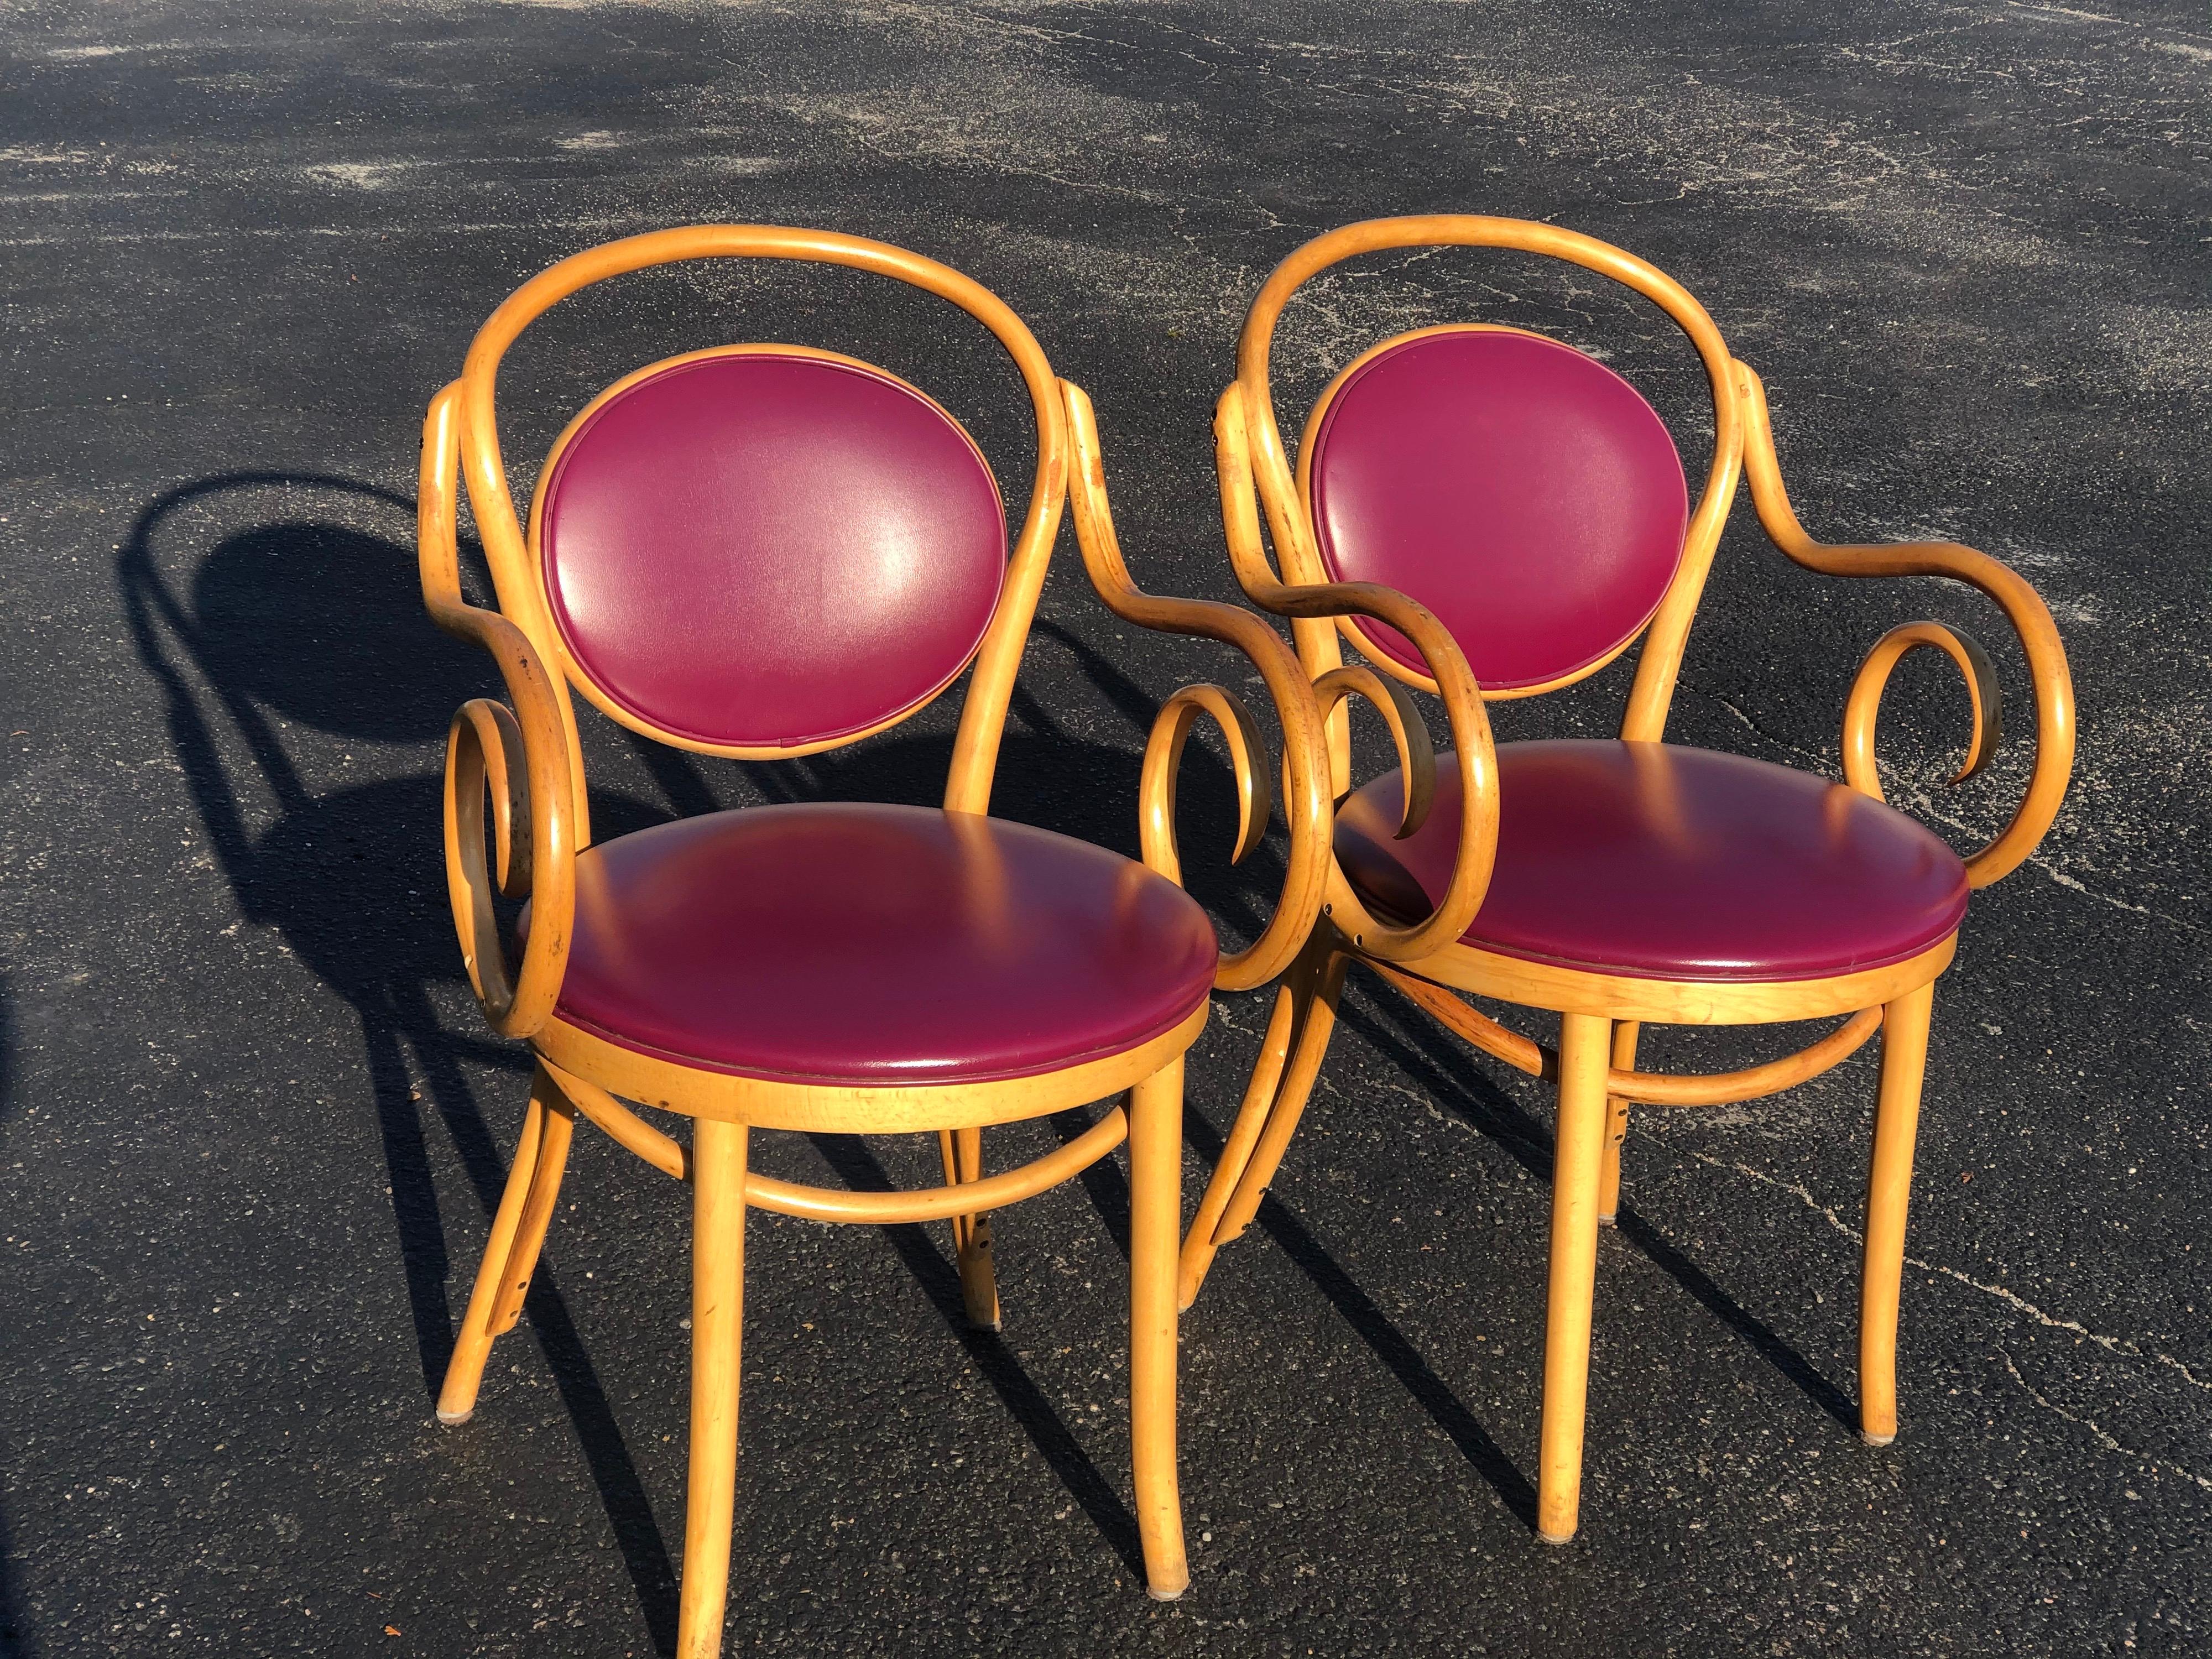 Pair of vintage bentwood Thonet style chairs in Violet. Price is for 2 chairs.
Classic timeless design. This amazing color is very rare. The pair is signed underneath made in Romania where Thonet had factories. The seat upholstery is a vinyl. Price